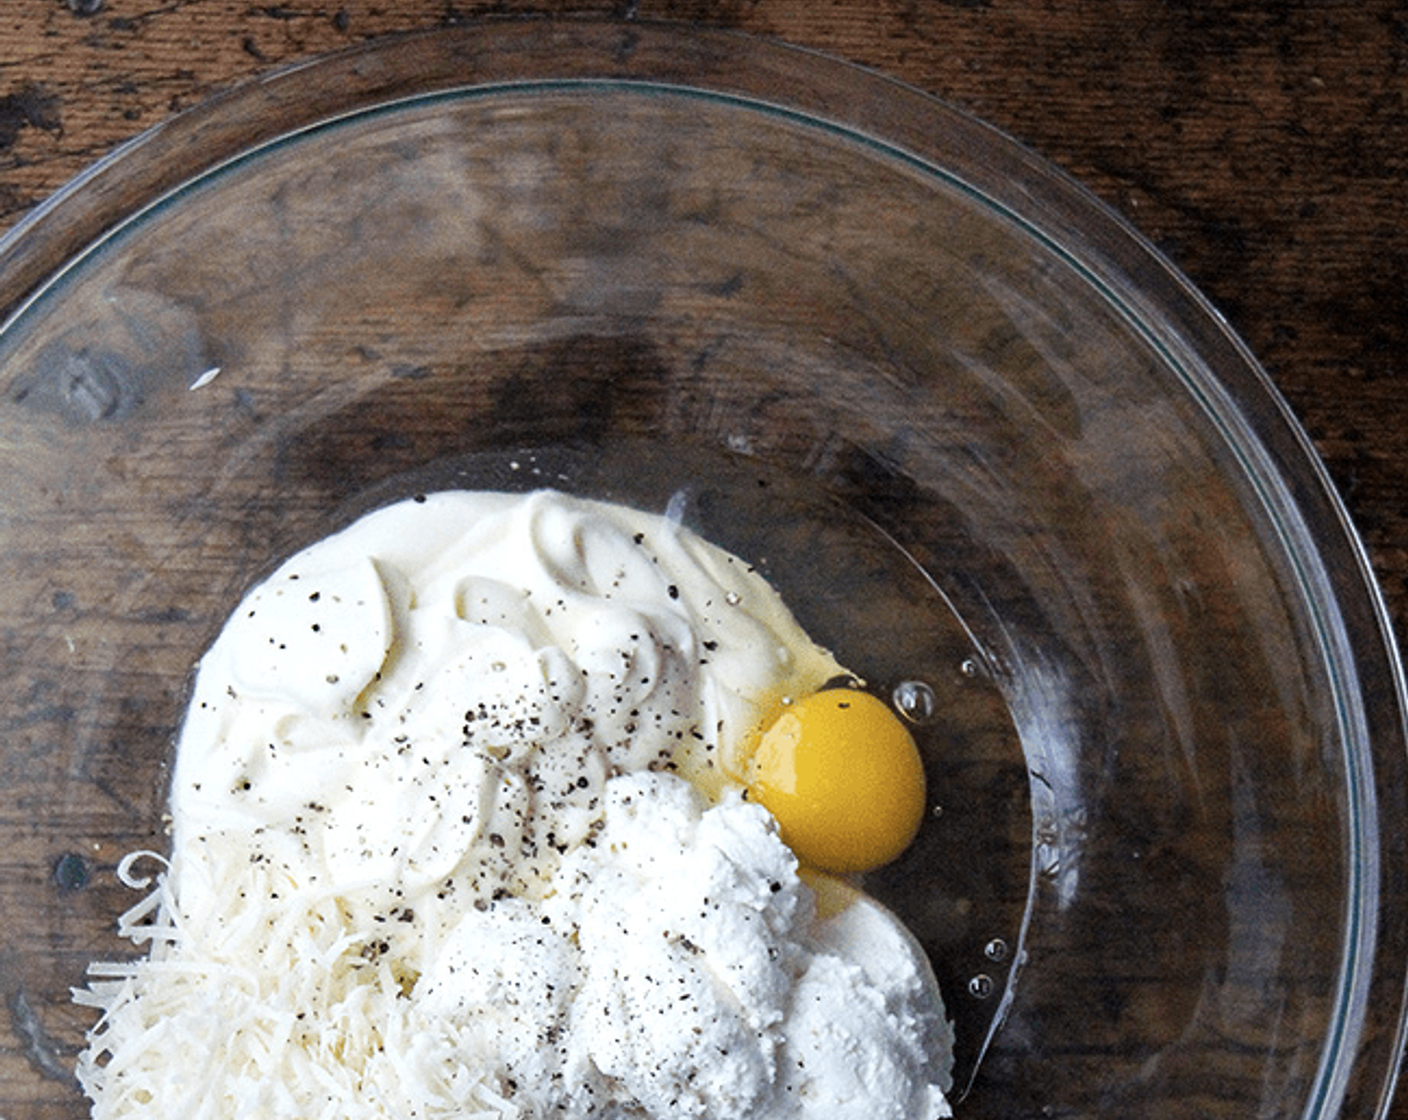 step 1 In a large bowl, combine the Ricotta Cheese (1 cup), Crème Fraîche (1 cup), Egg (1), and 1/2 cup of the Pecorino Romano Cheese (1/2 cup). Season with Kosher Salt (to taste) and Freshly Ground Black Pepper (to taste) and set aside.